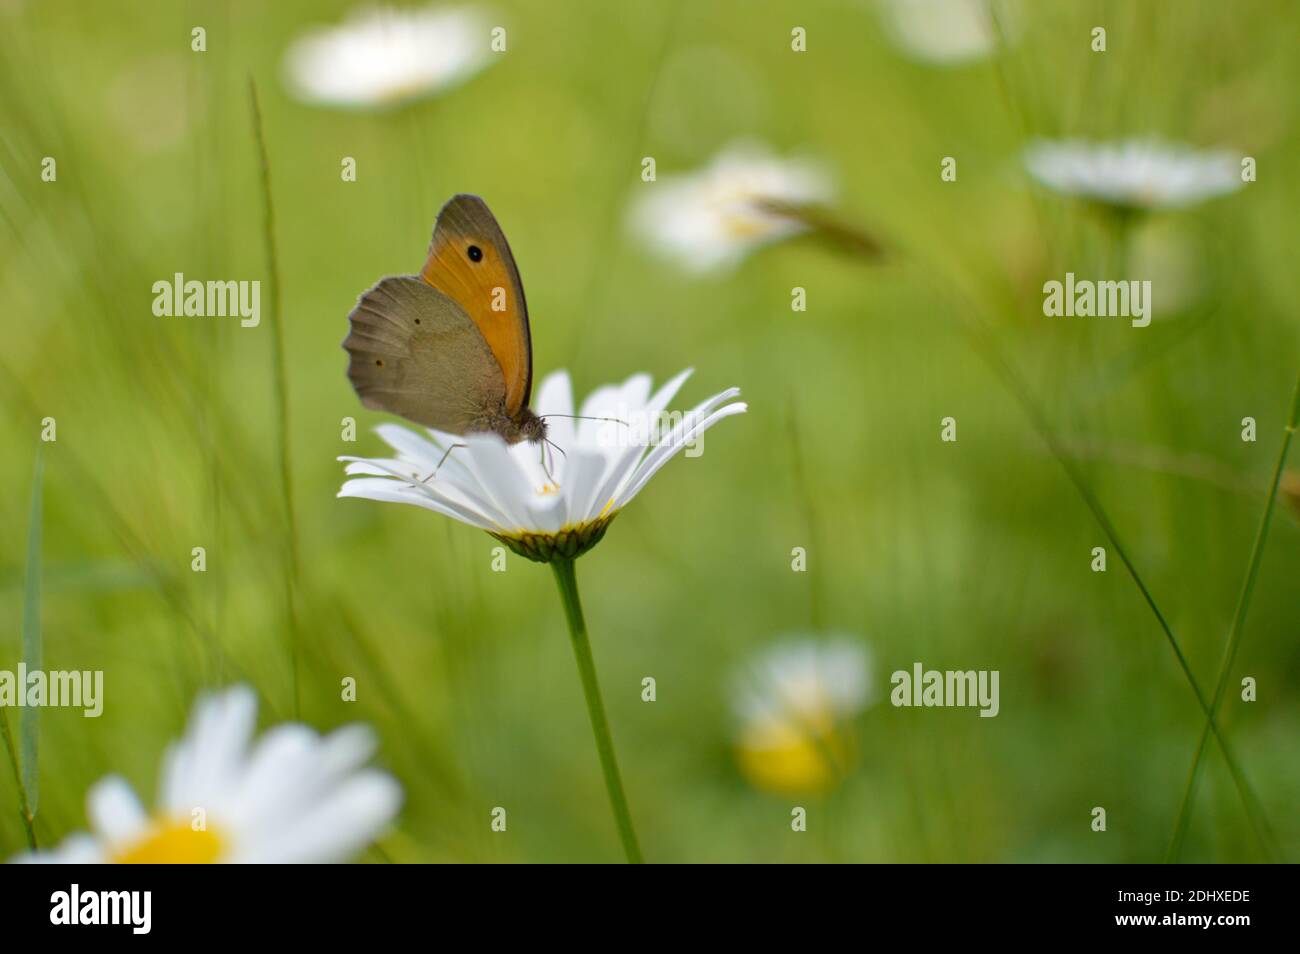 Large heath butterfly on an ox eye daisy flower in nature, brown and orange butterfly on a white flower. Close up. Stock Photo